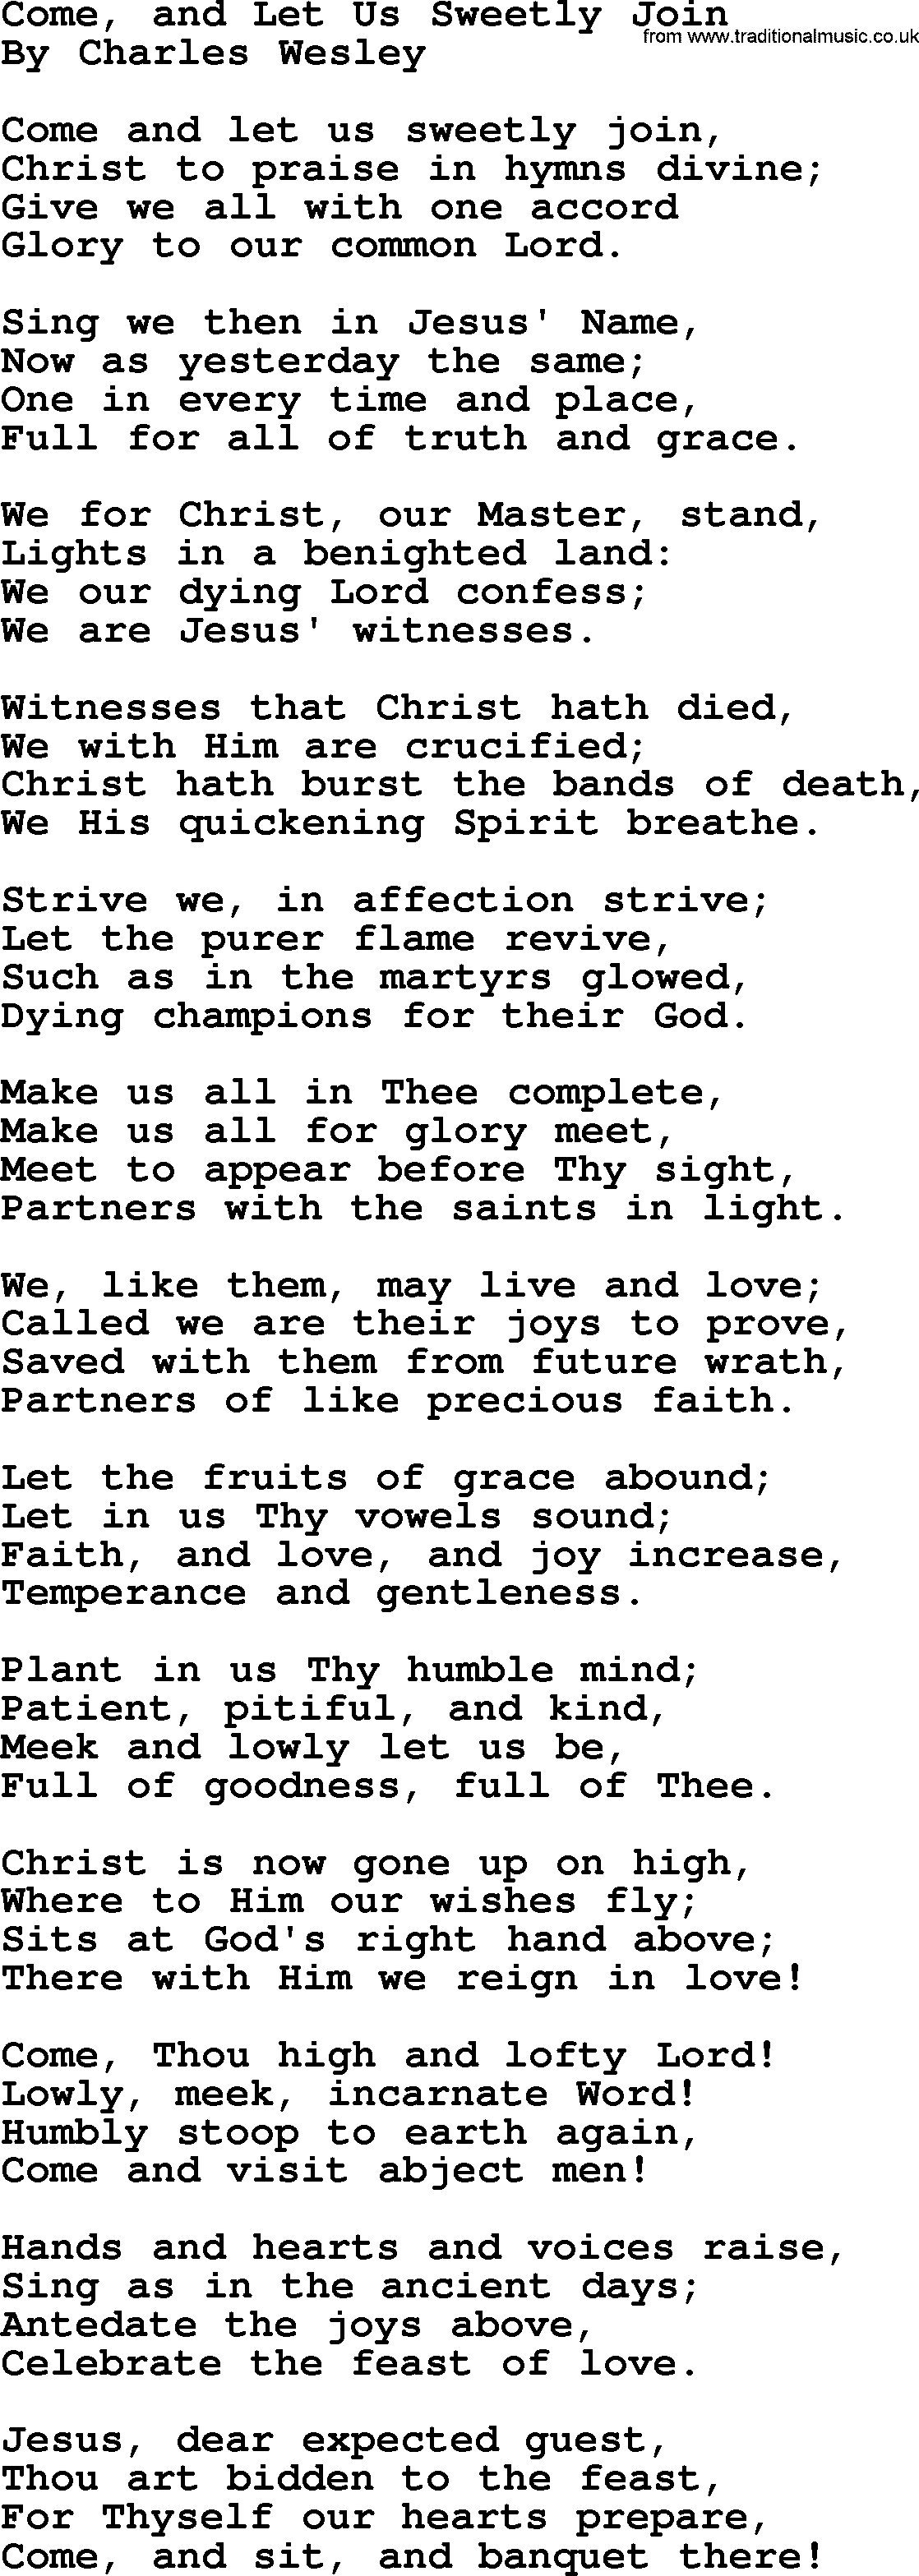 Charles Wesley hymn: Come, And Let Us Sweetly Join, lyrics